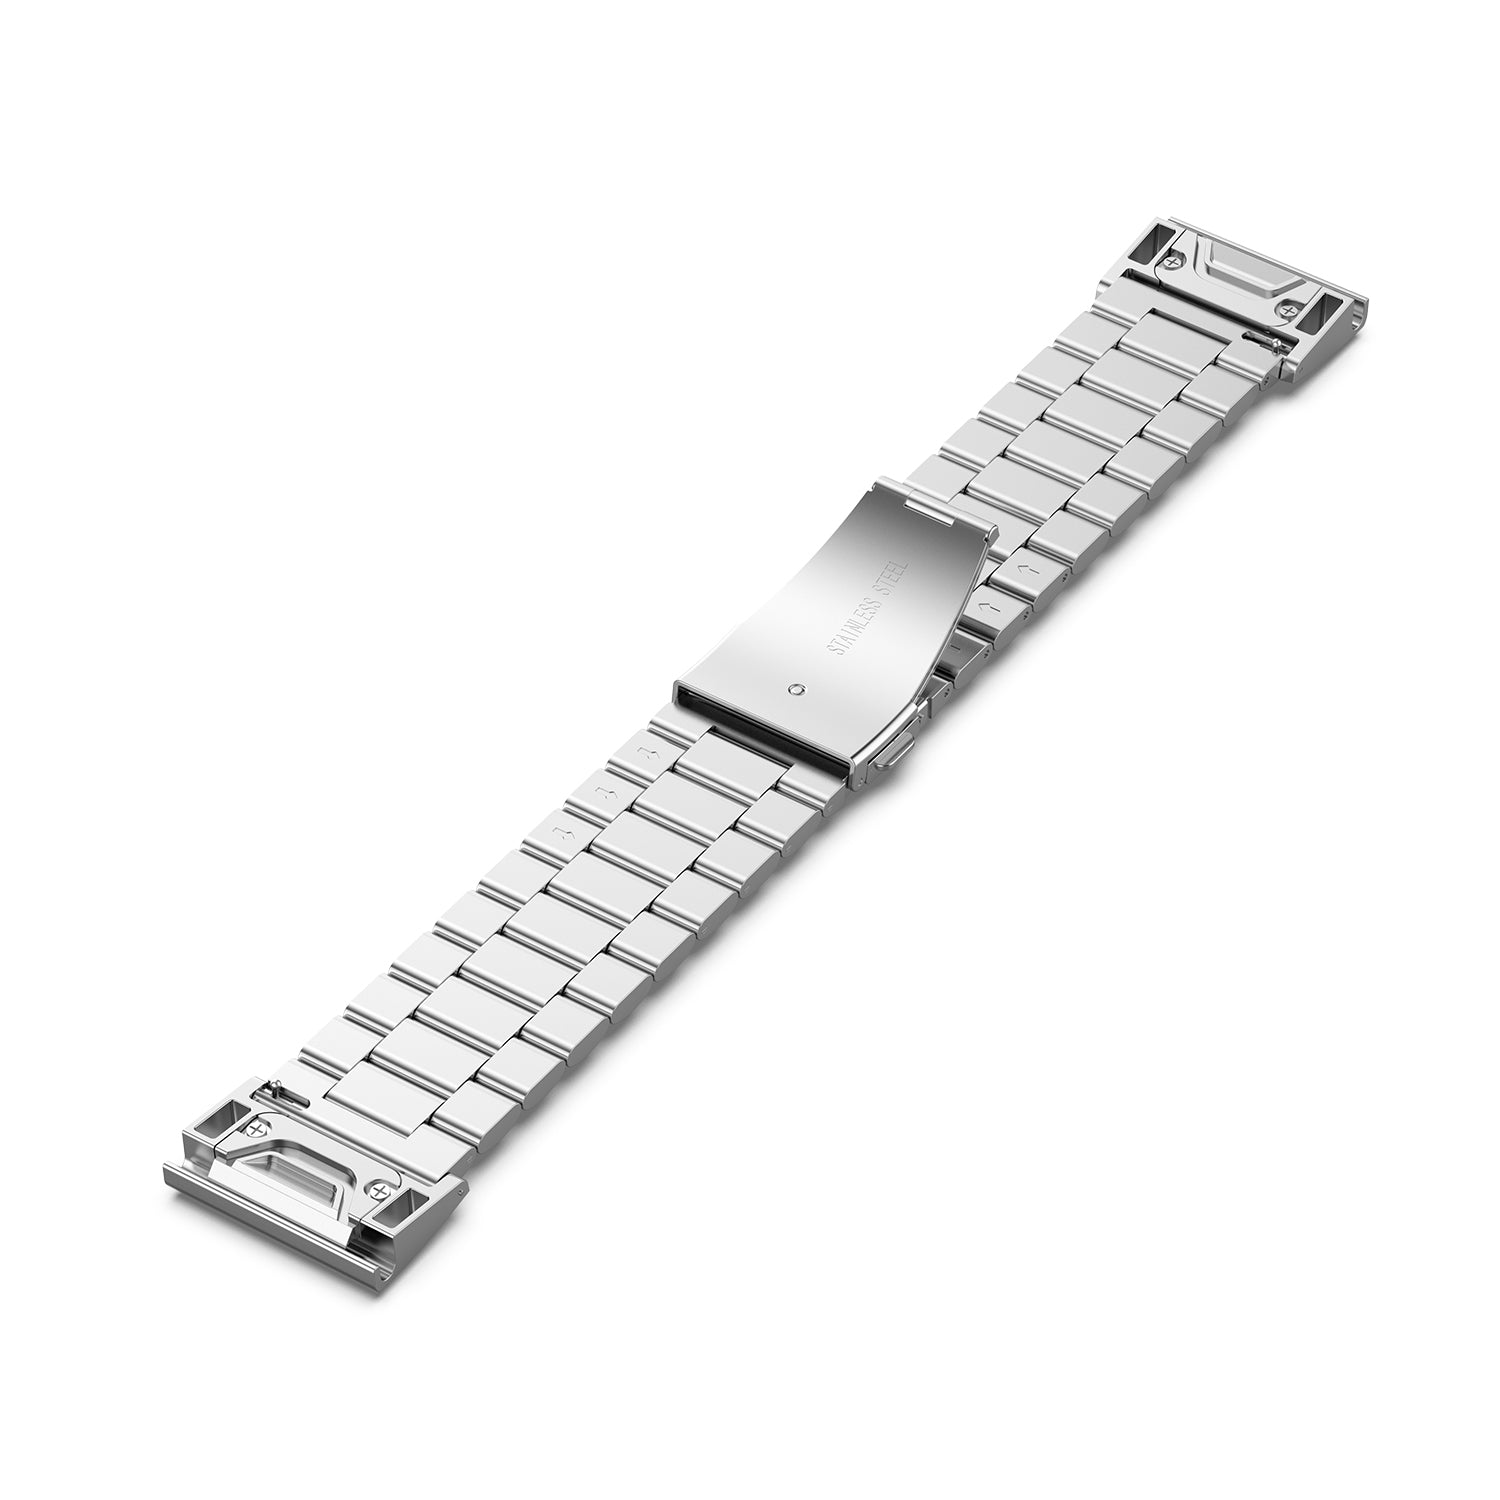 Three Beads Stainless Steel Replacement Wrist Strap Watch Band for Garmin Fenix 6 - Silver